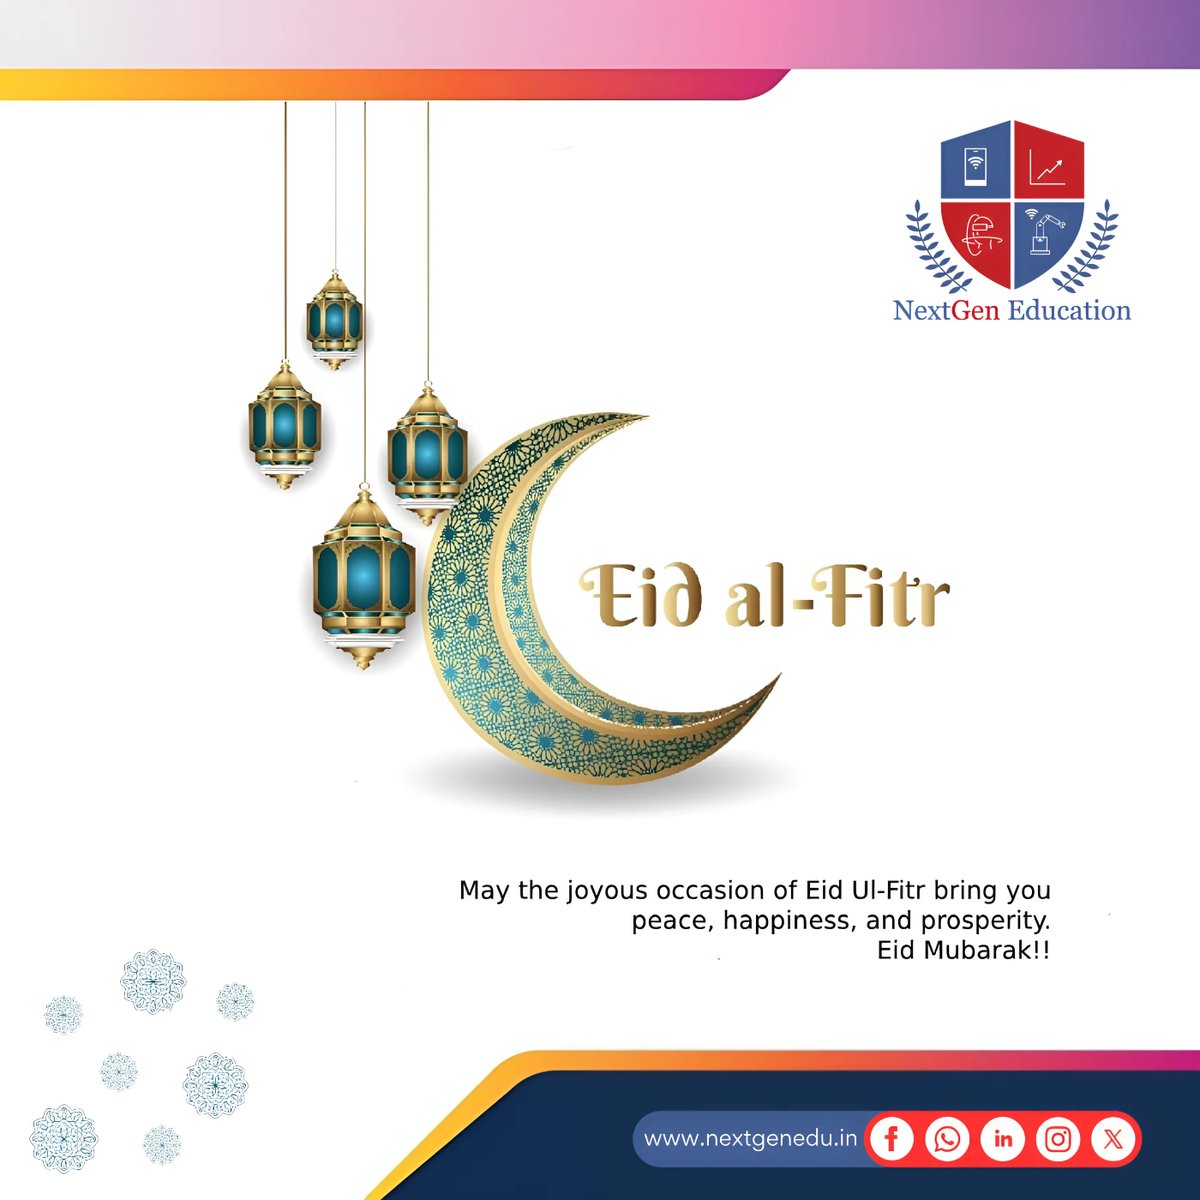 Wishing you and your loved ones a joyous Eid Mubarak! May this special day bring peace, happiness, and blessings to all. ✨🌙#eidmubarak #happiness #blessings #eidulfitr #nextgeneducation